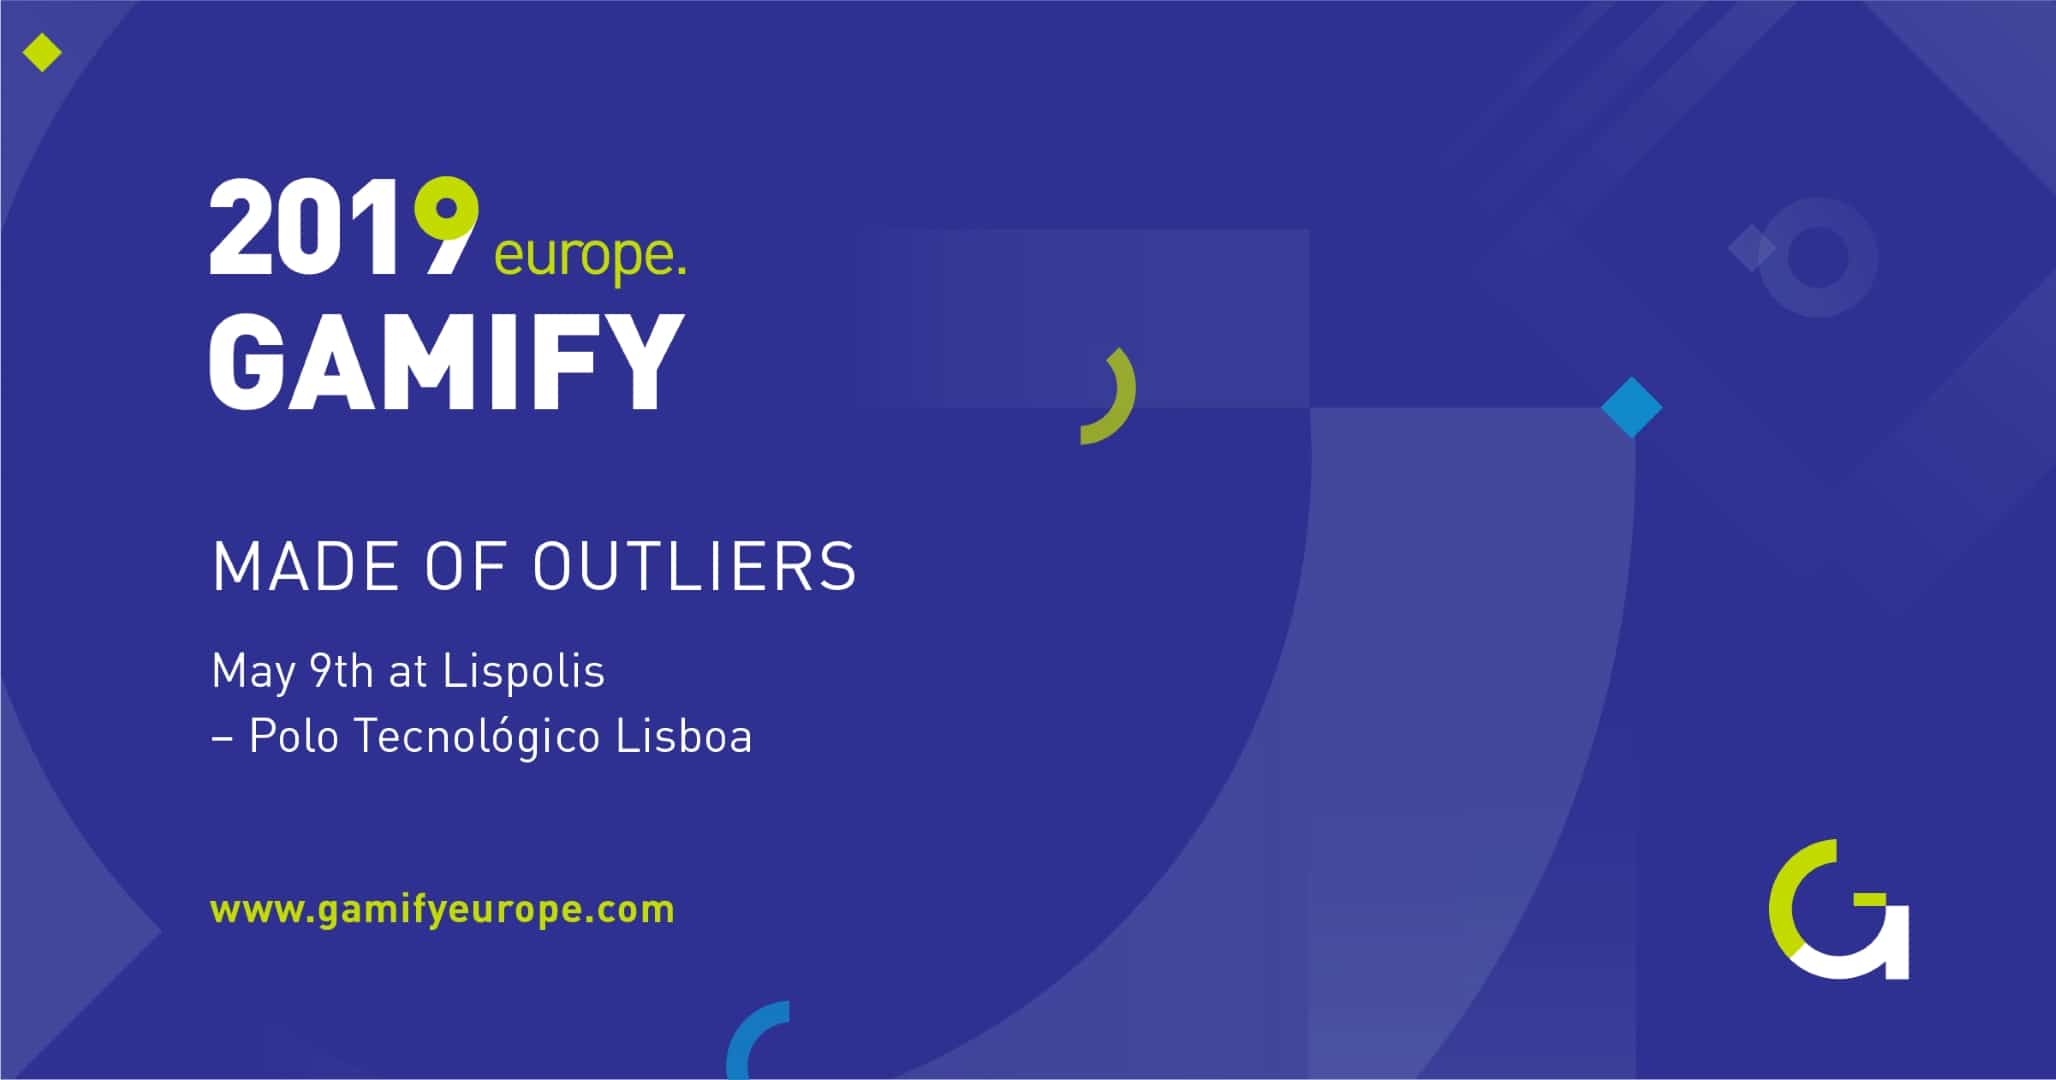 Gamify Europe